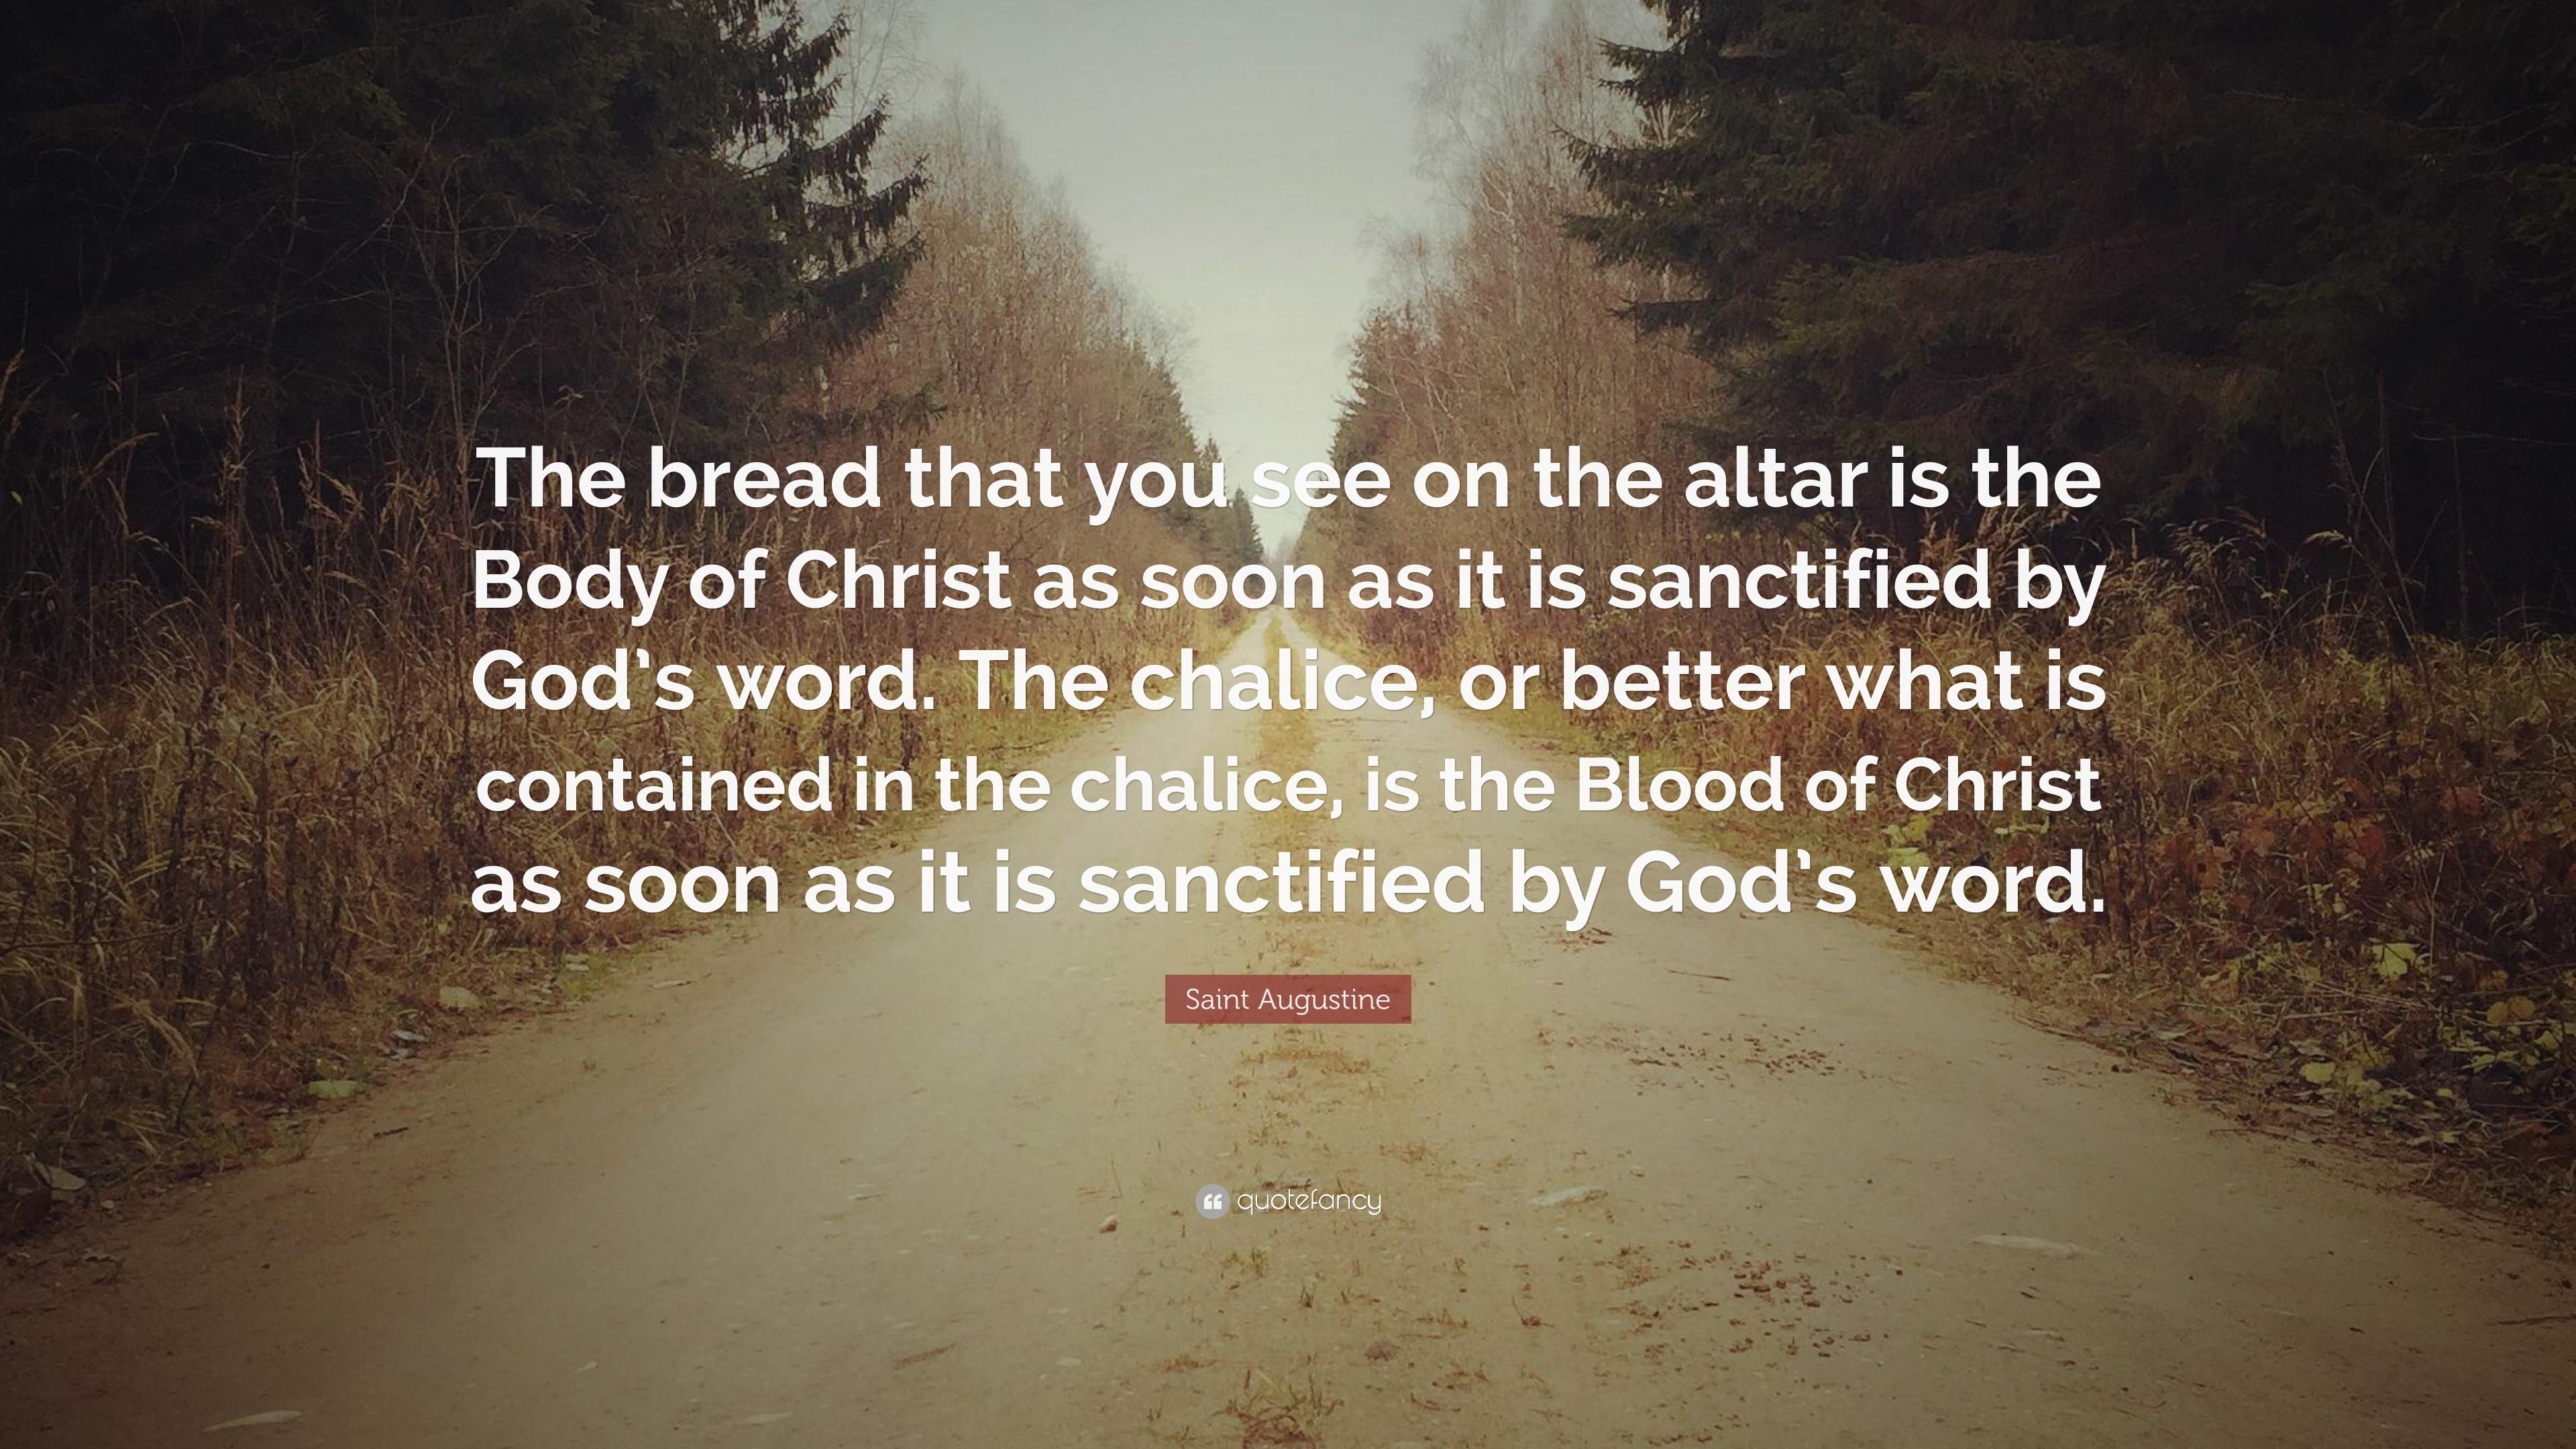 Saint Augustine Quote: “The bread that you see on the altar is the Body ...